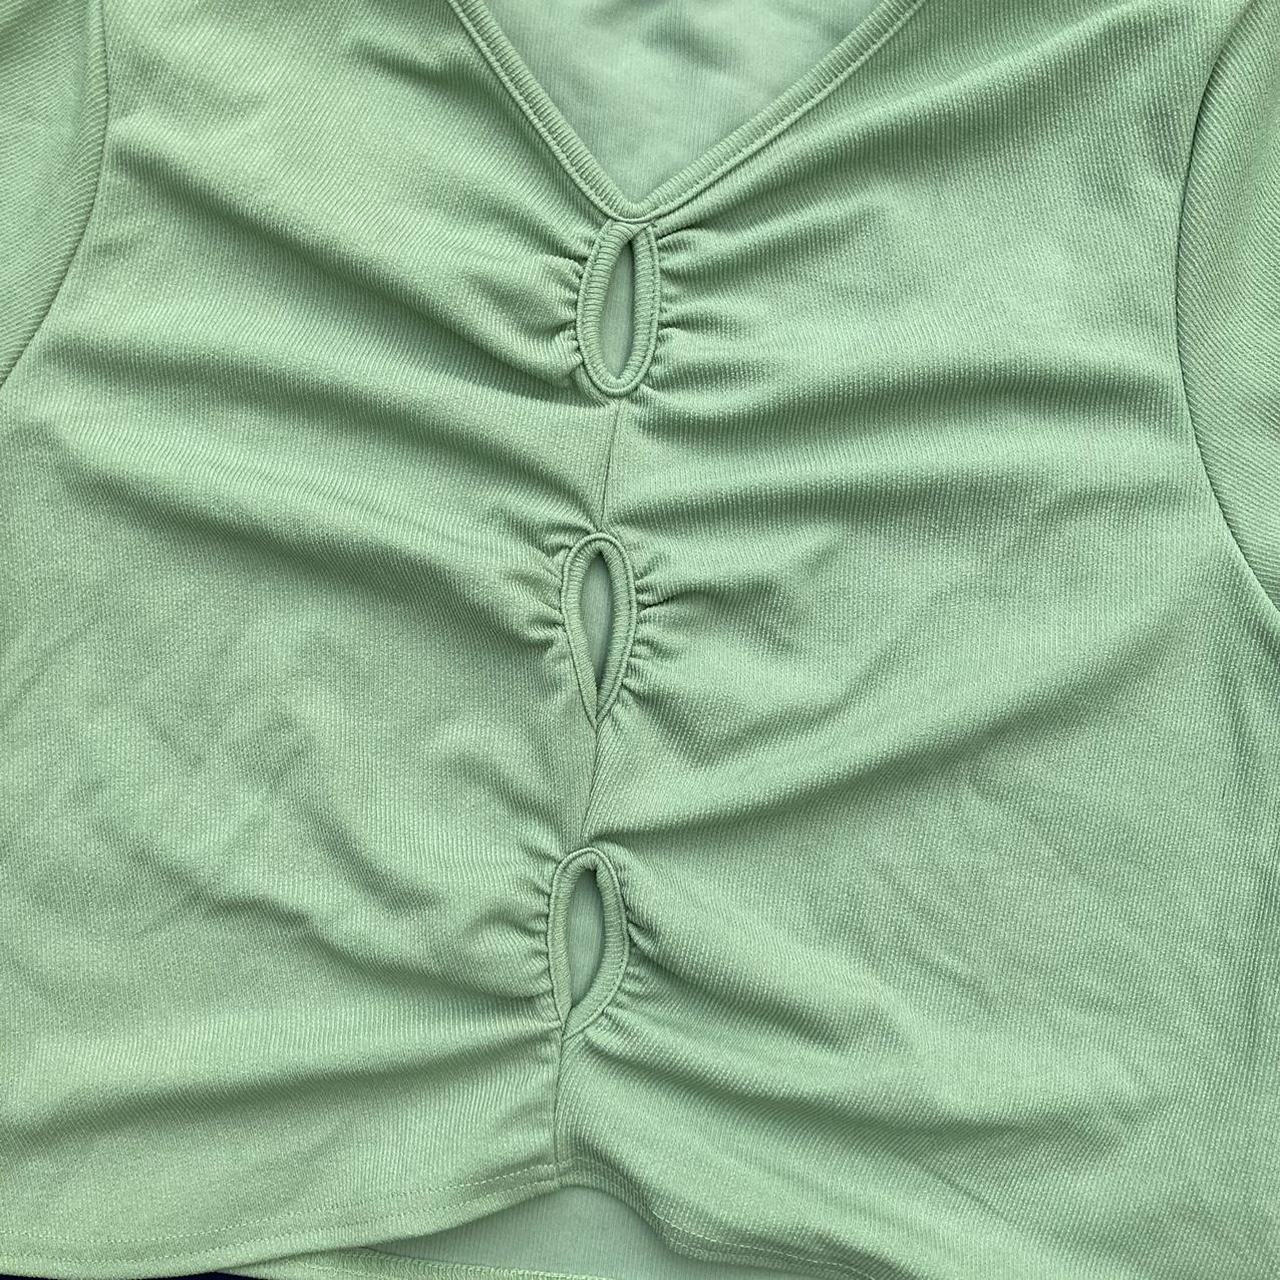 Product Image 2 - Pistachio green cut-out crop top